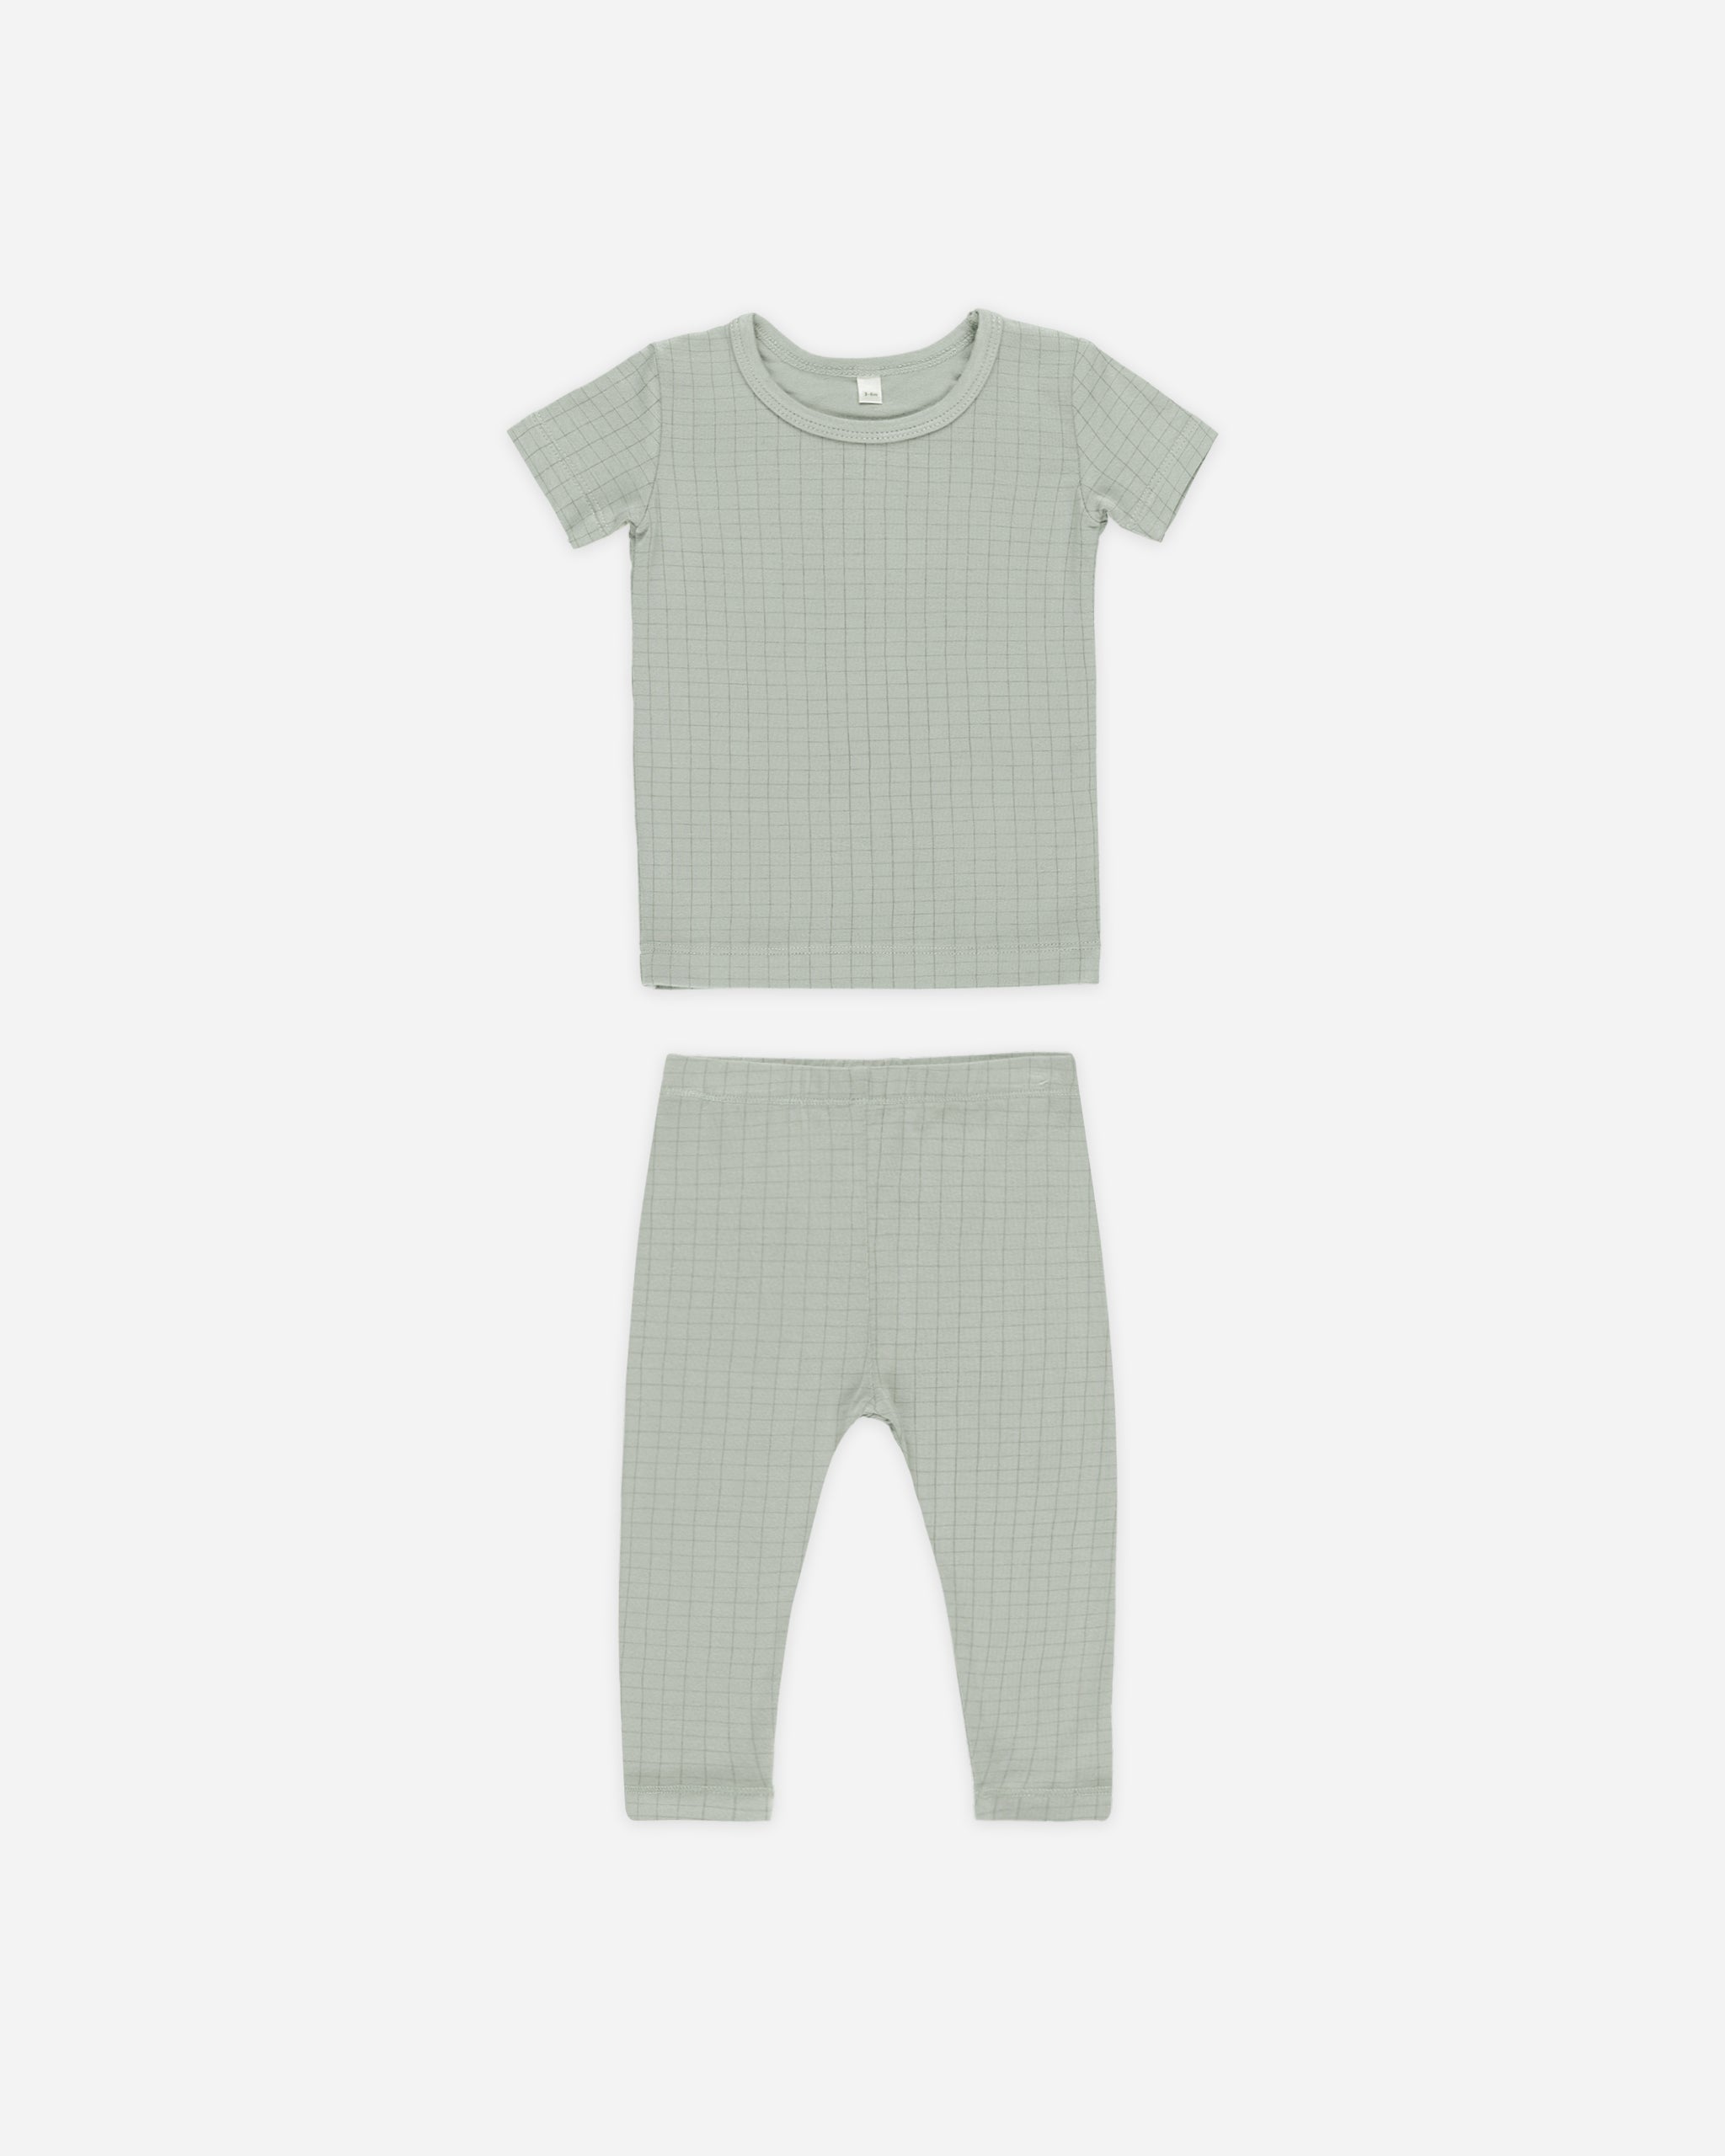 Bamboo Short Sleeve Pajama Set || Grid - Rylee + Cru | Kids Clothes | Trendy Baby Clothes | Modern Infant Outfits |